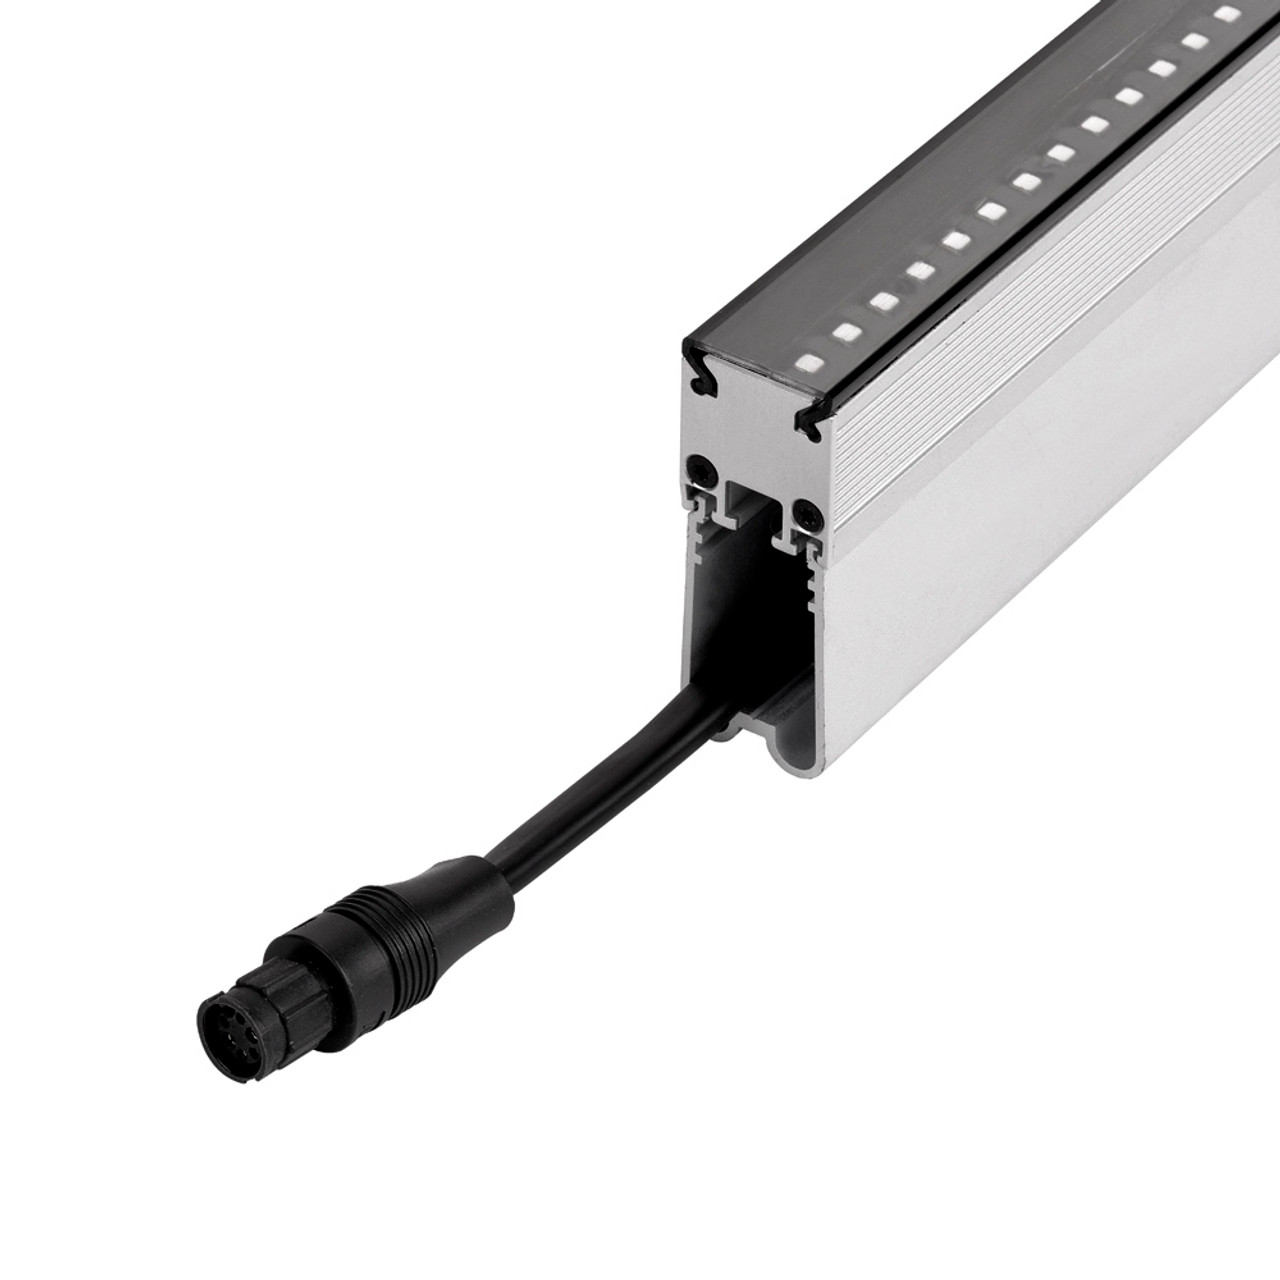 Martin Lighting Exterior PixLine 20 Outdoor Rated Linear LED Video Fixture - 20 MM Pitch (Square Diffuser)